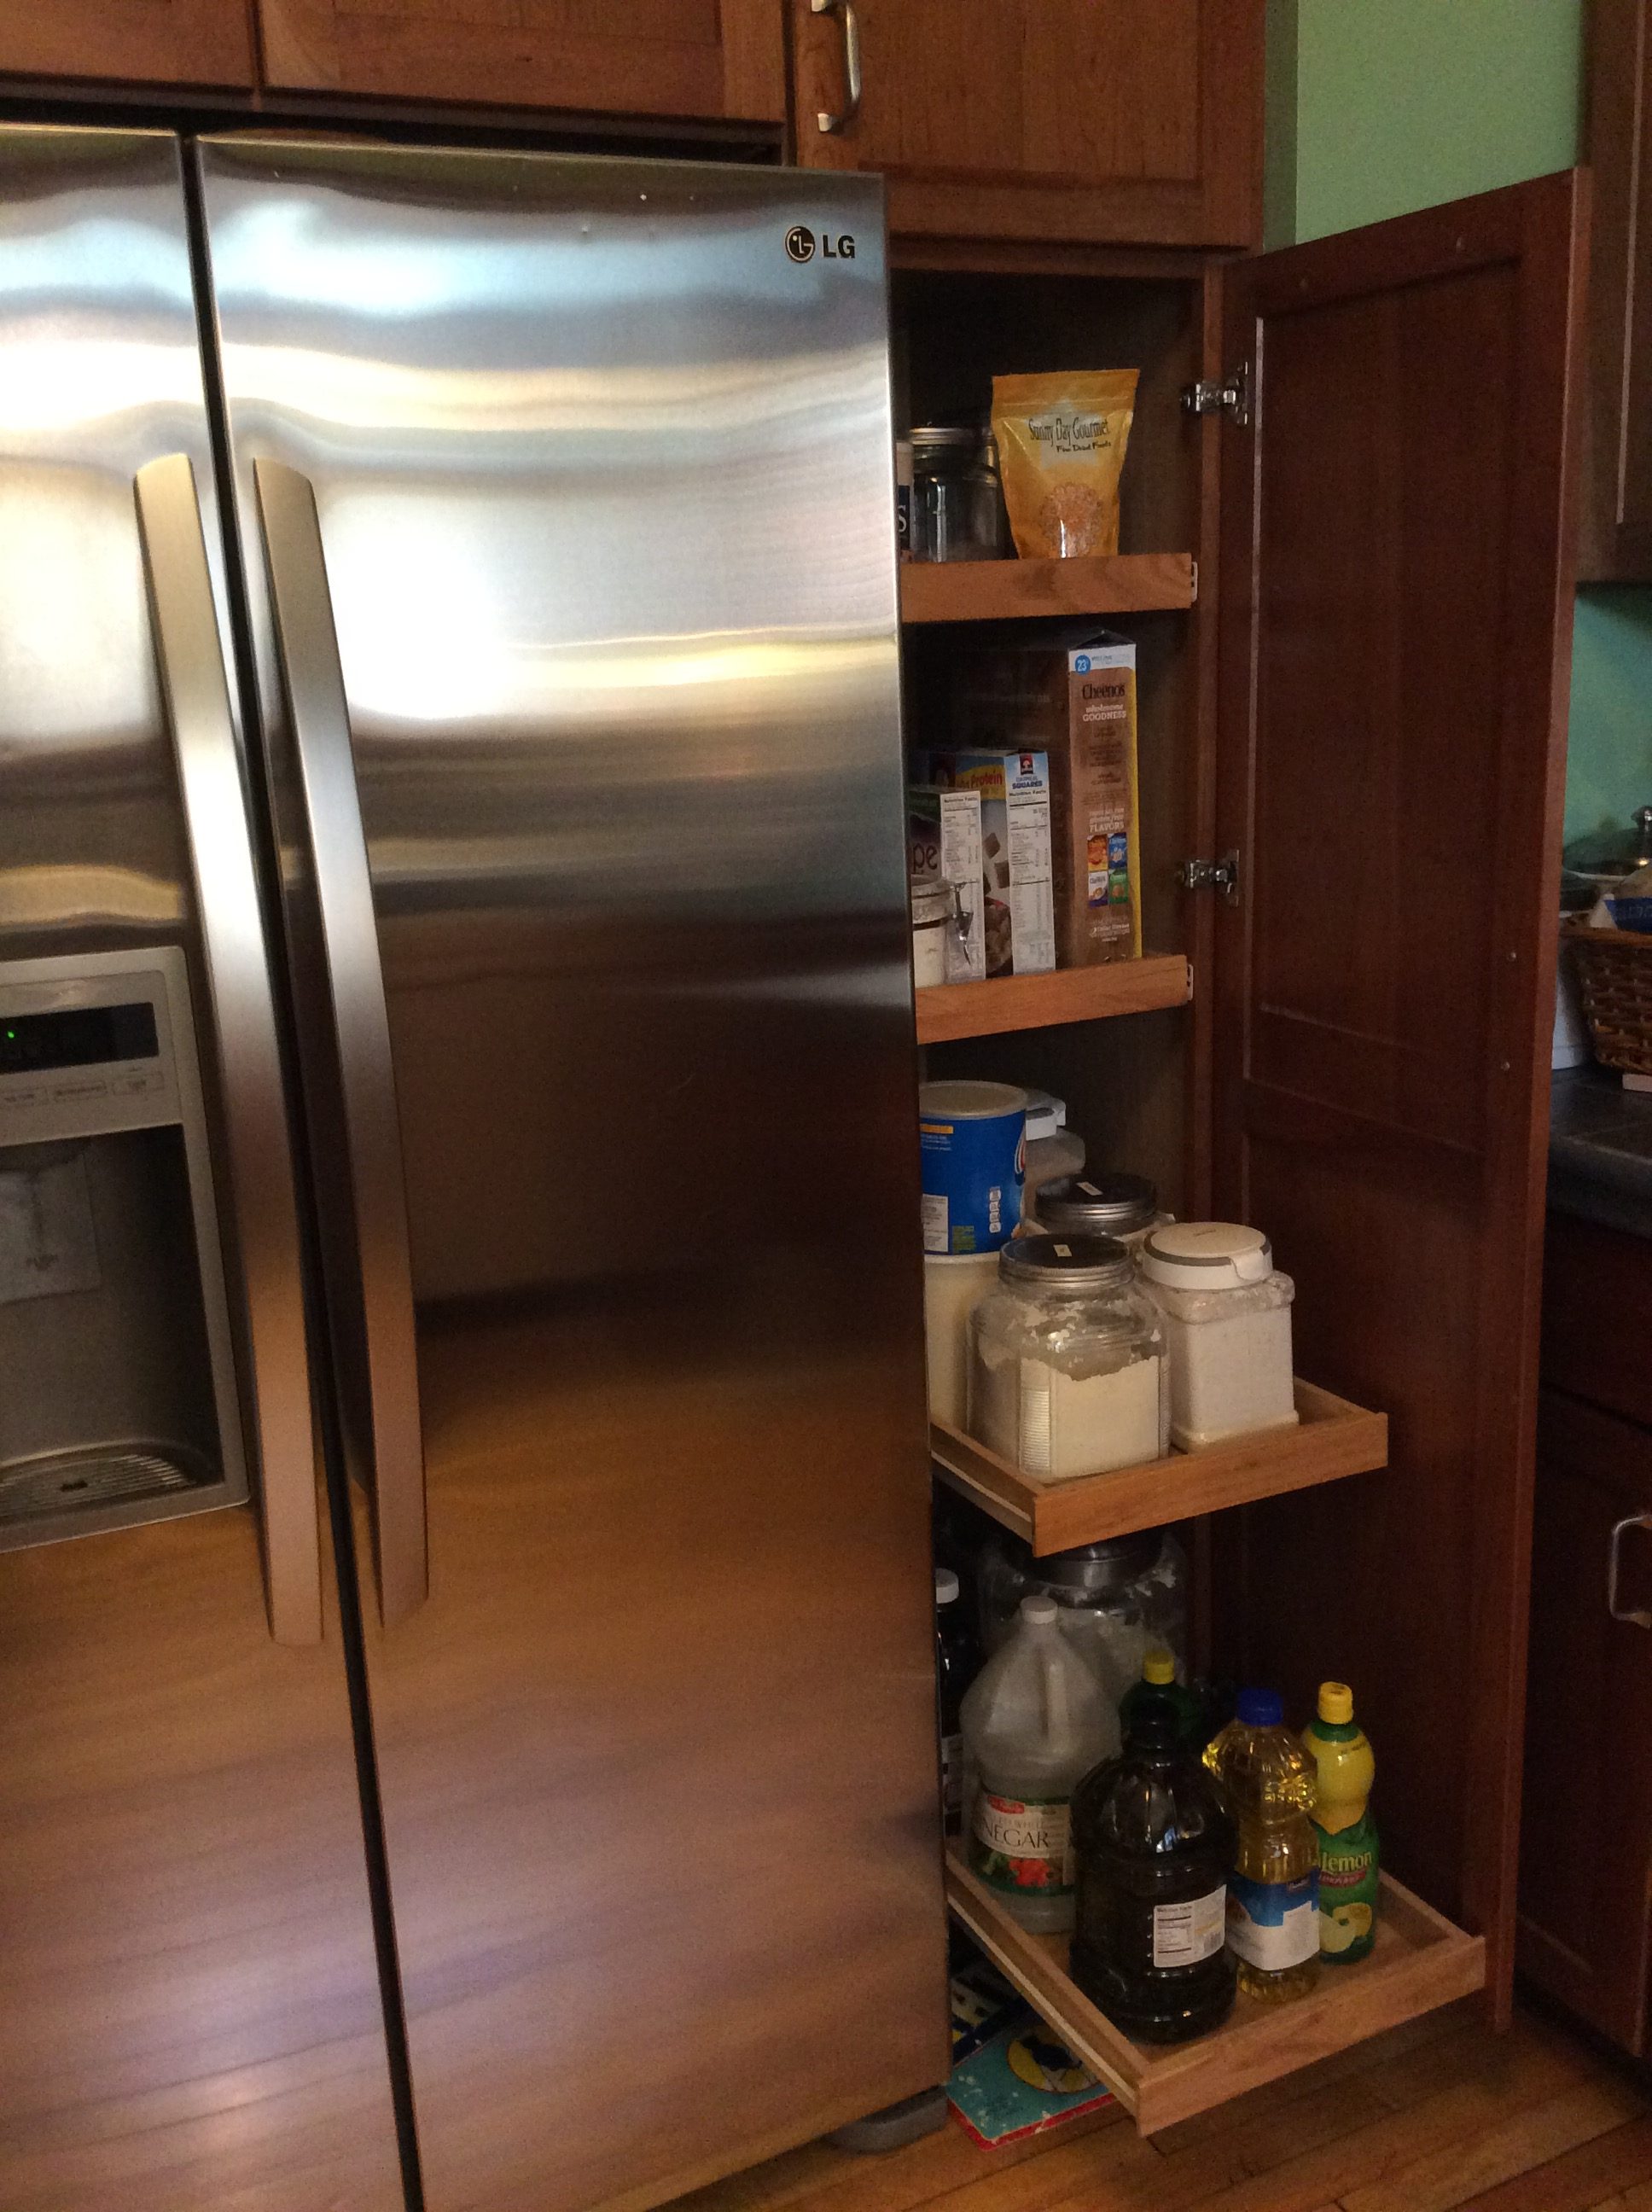 Stainless refrigerator/freezer with in-door filtered water and ice. View of pull out cabinet shelves, a feature in cabinetry throughout kitchen.